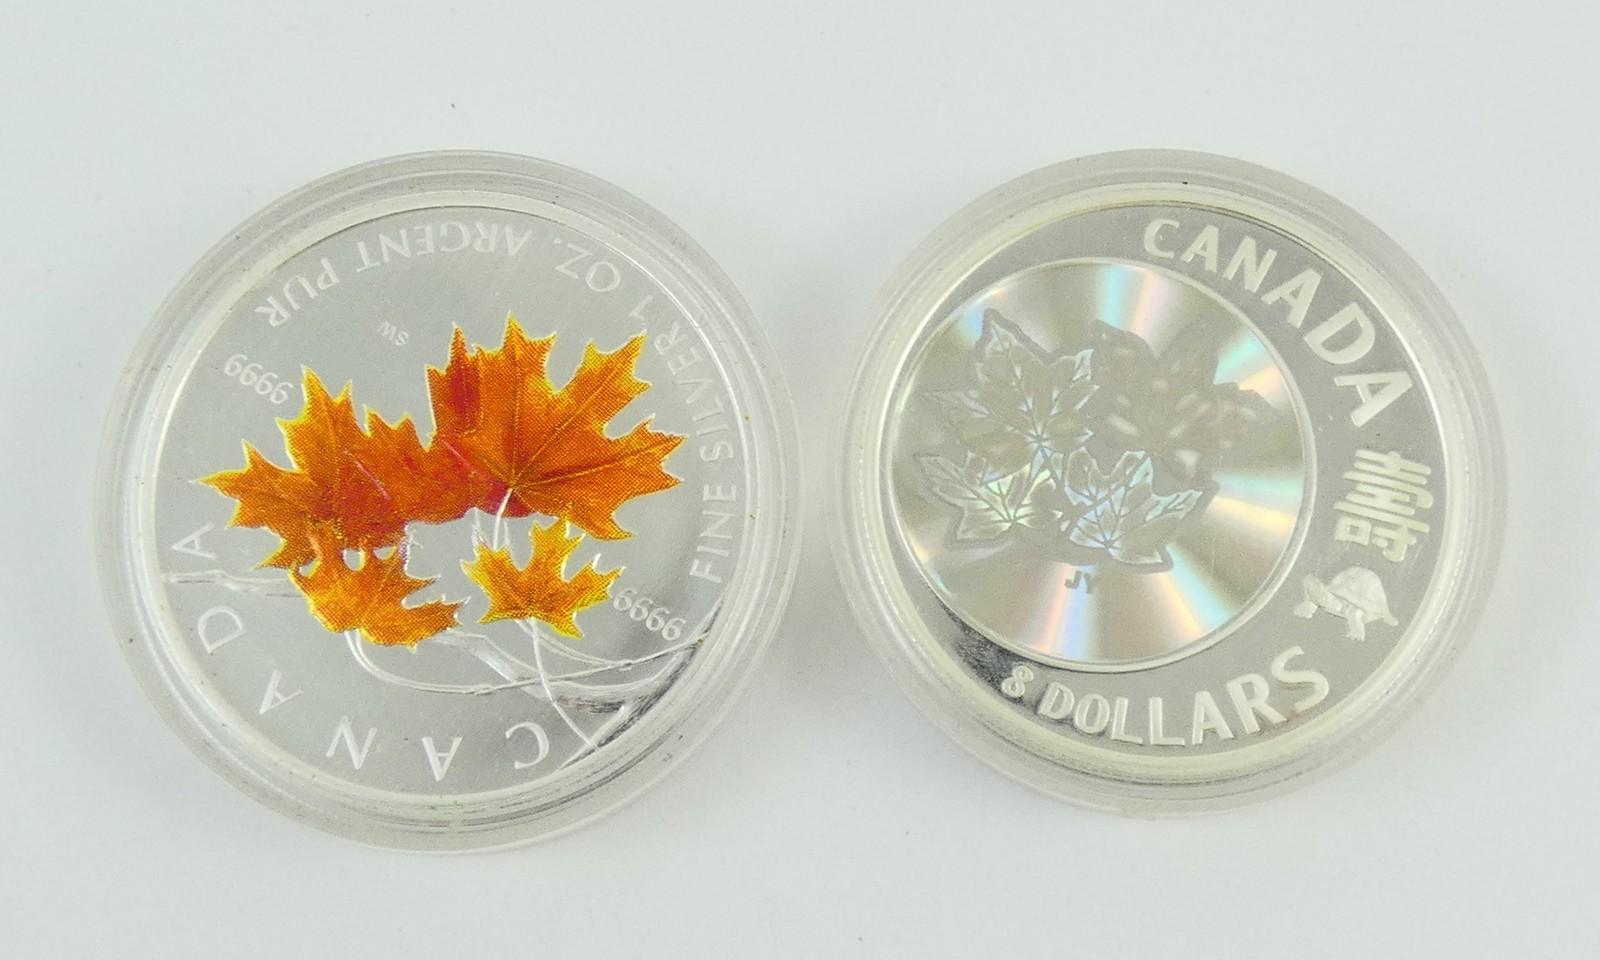 2 CANADIAN SILVER COINS - no tax